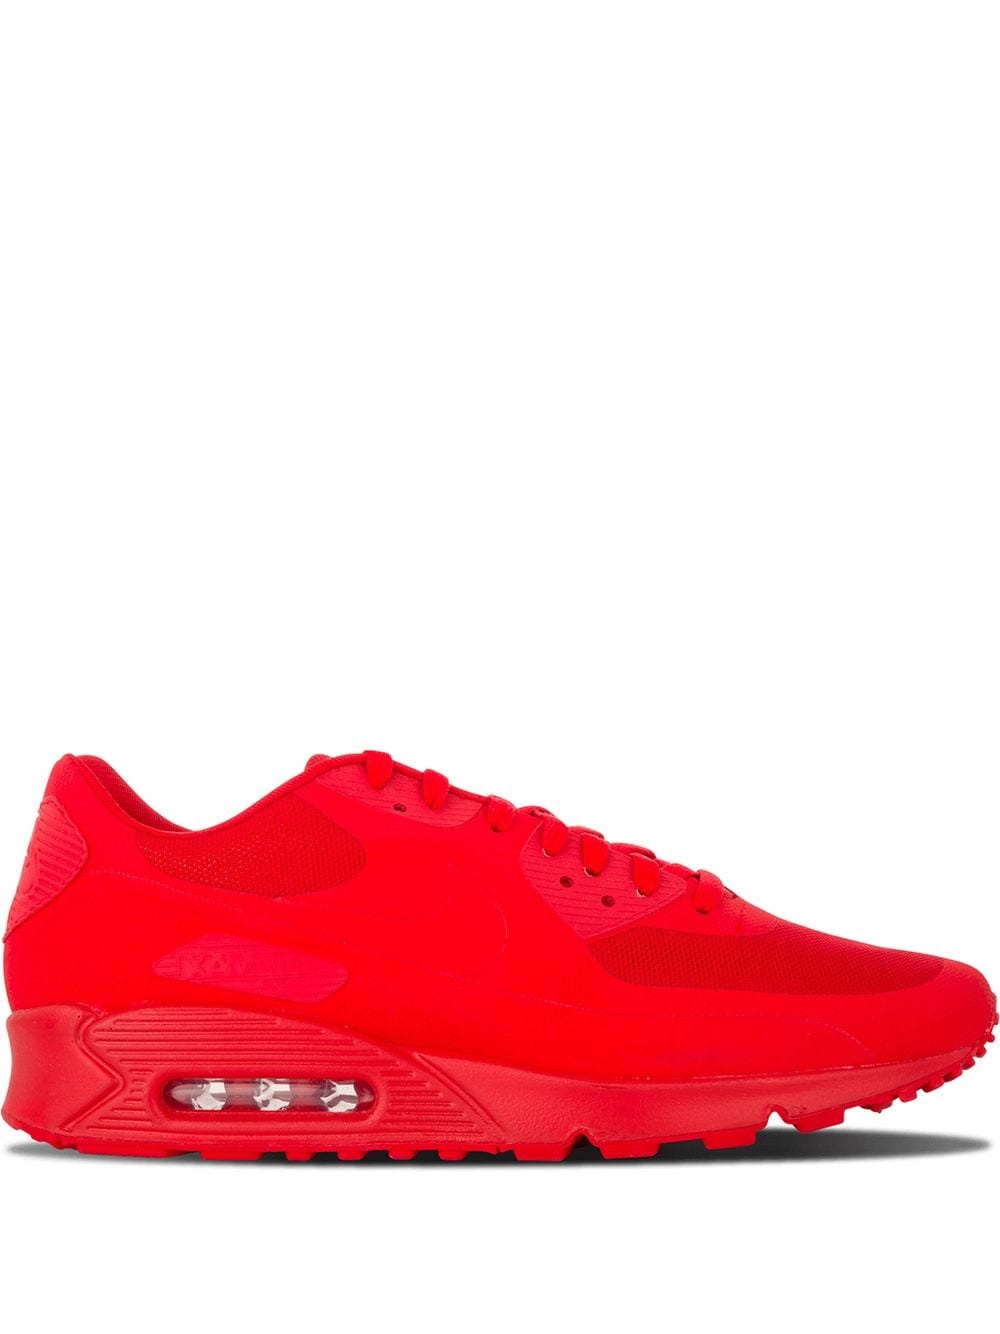 Air Max 90 Hyperfuse QS "Independence Day" sneakers - 1